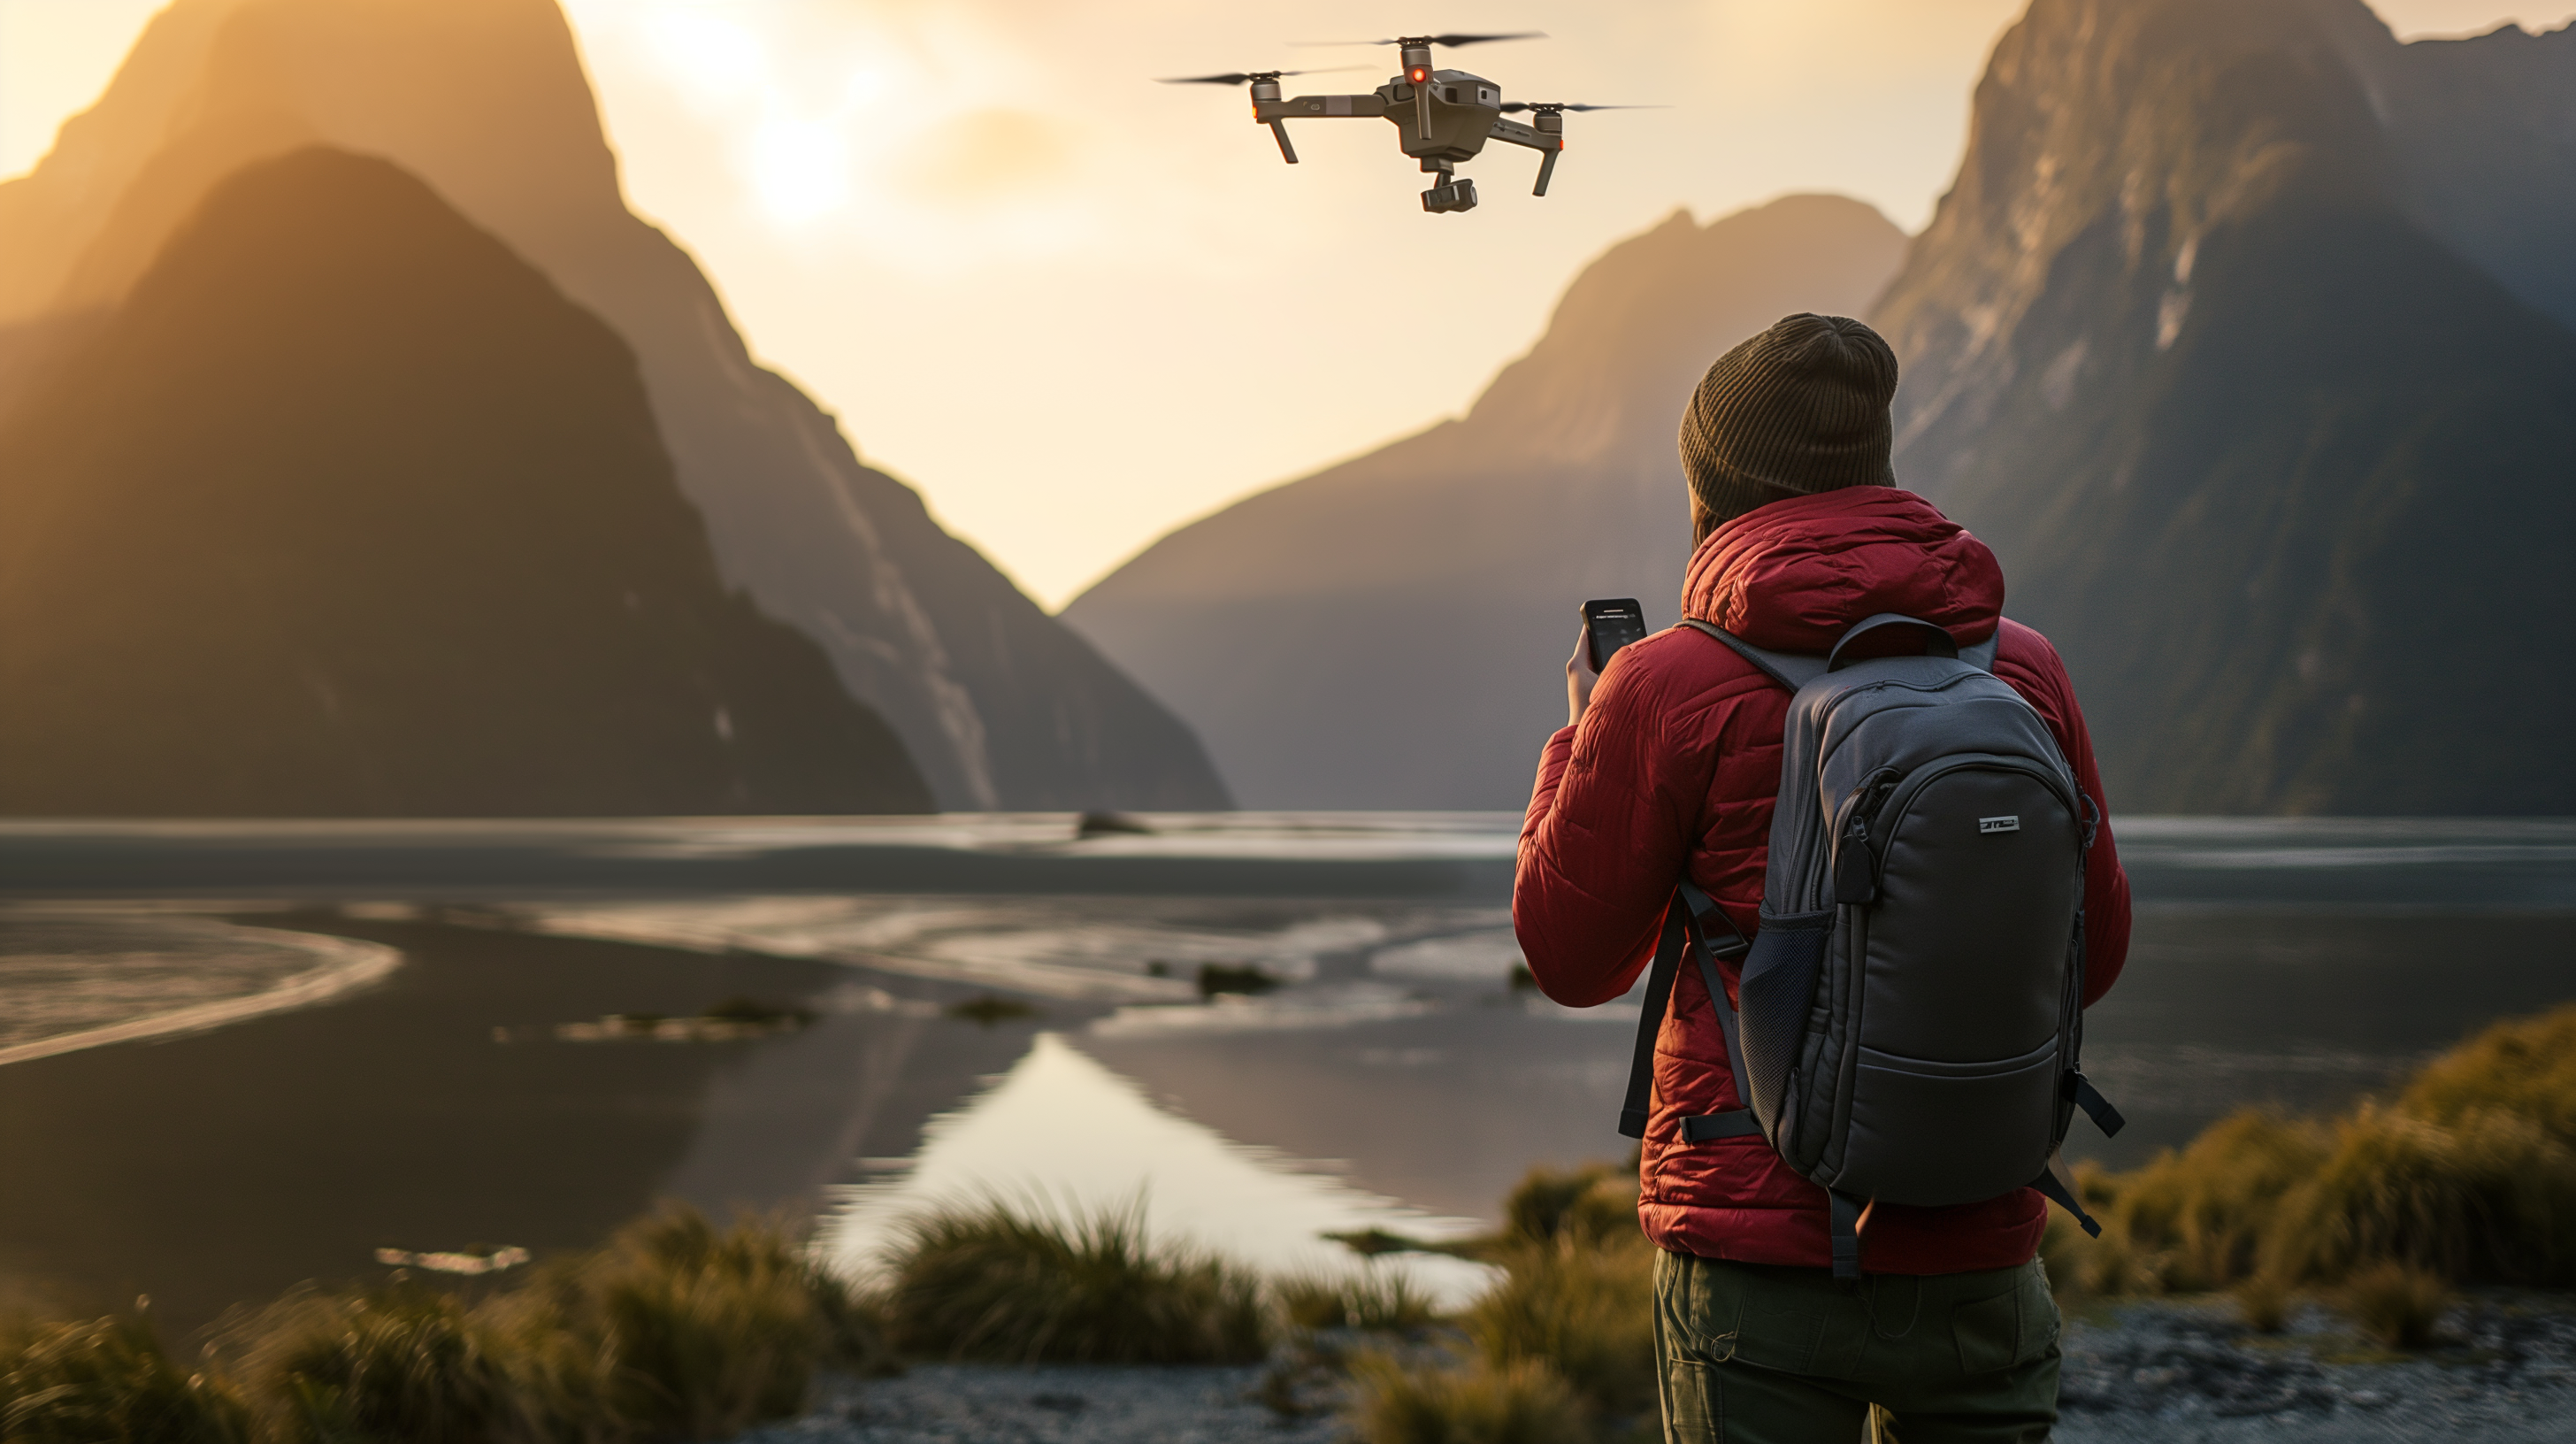 Adventurer flying a drone at dawn in Milford Sound, New Zealand during Waitangi Day weekend sale